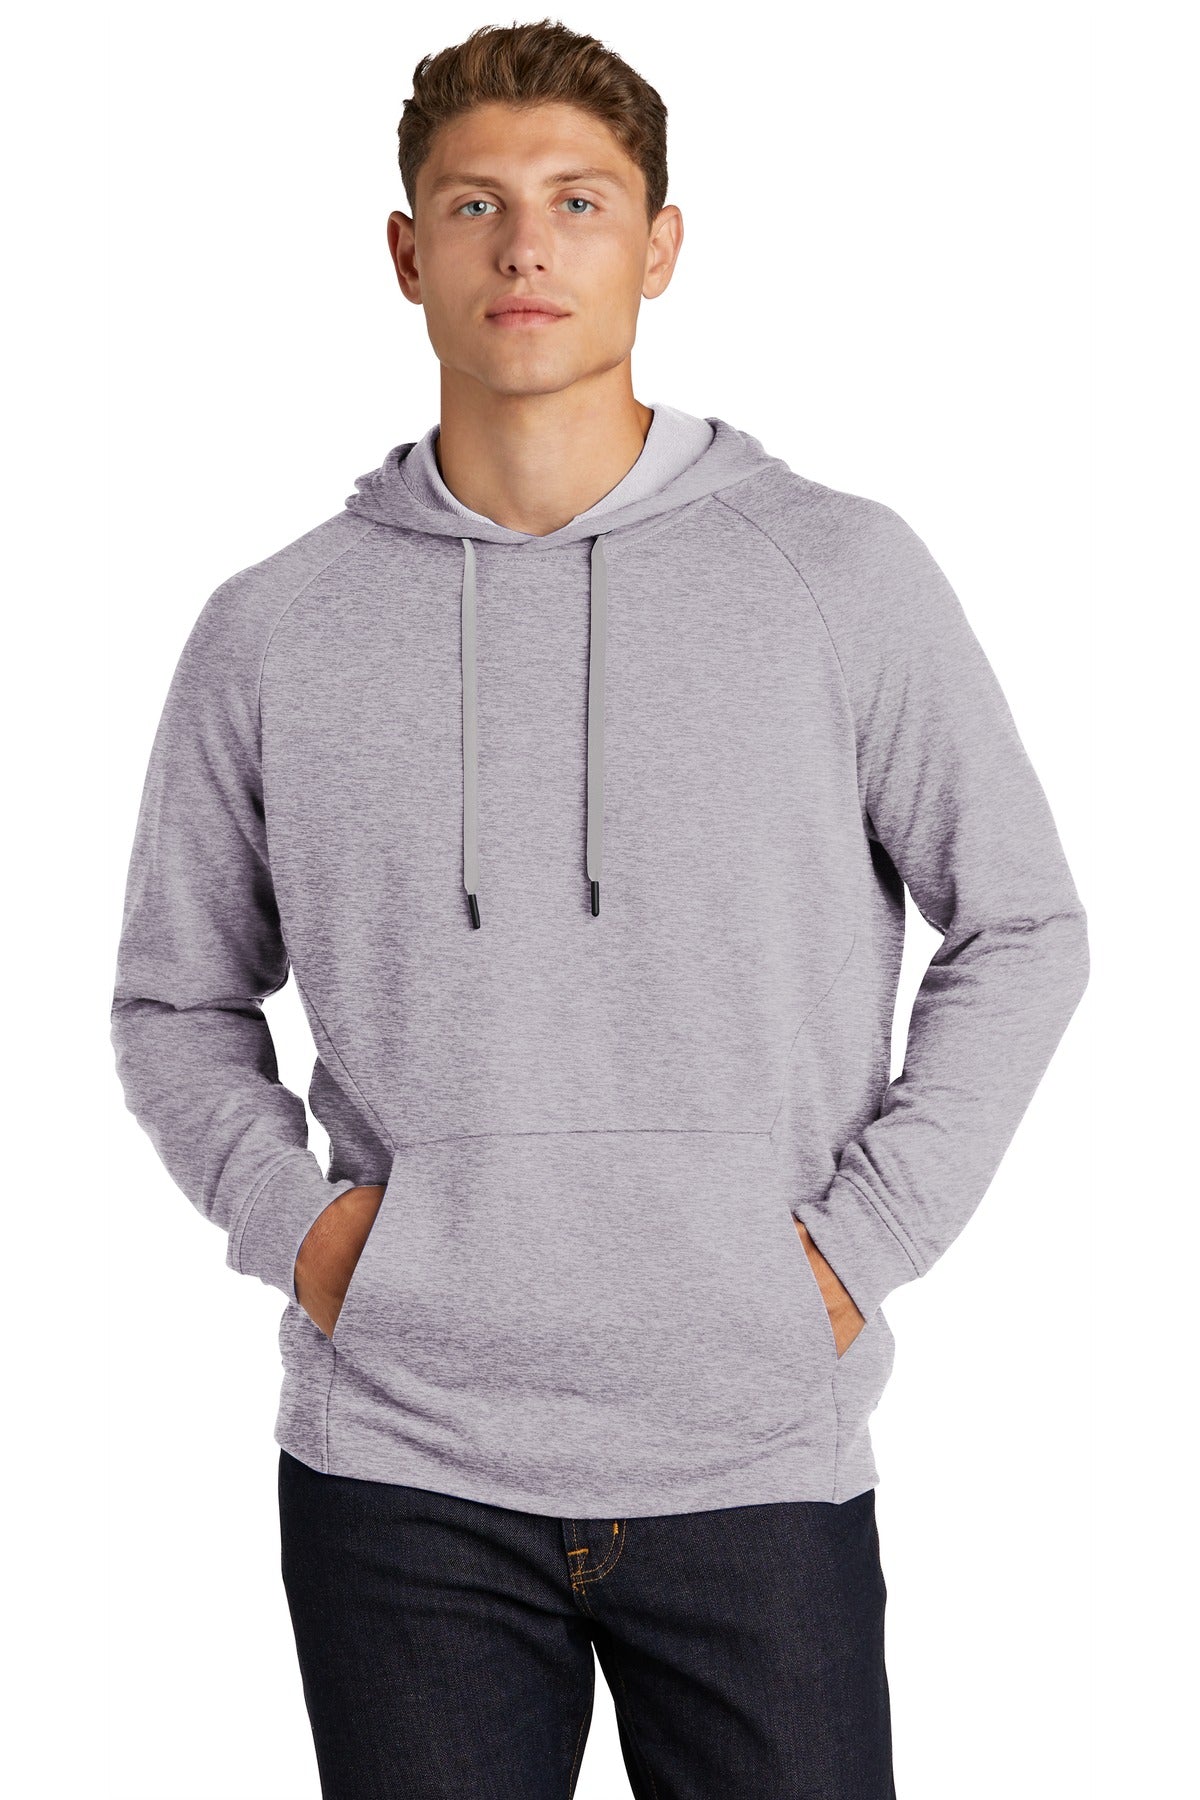 Custom Embroidered - Sport-Tek ® Lightweight French Terry Pullover Hoodie. ST272